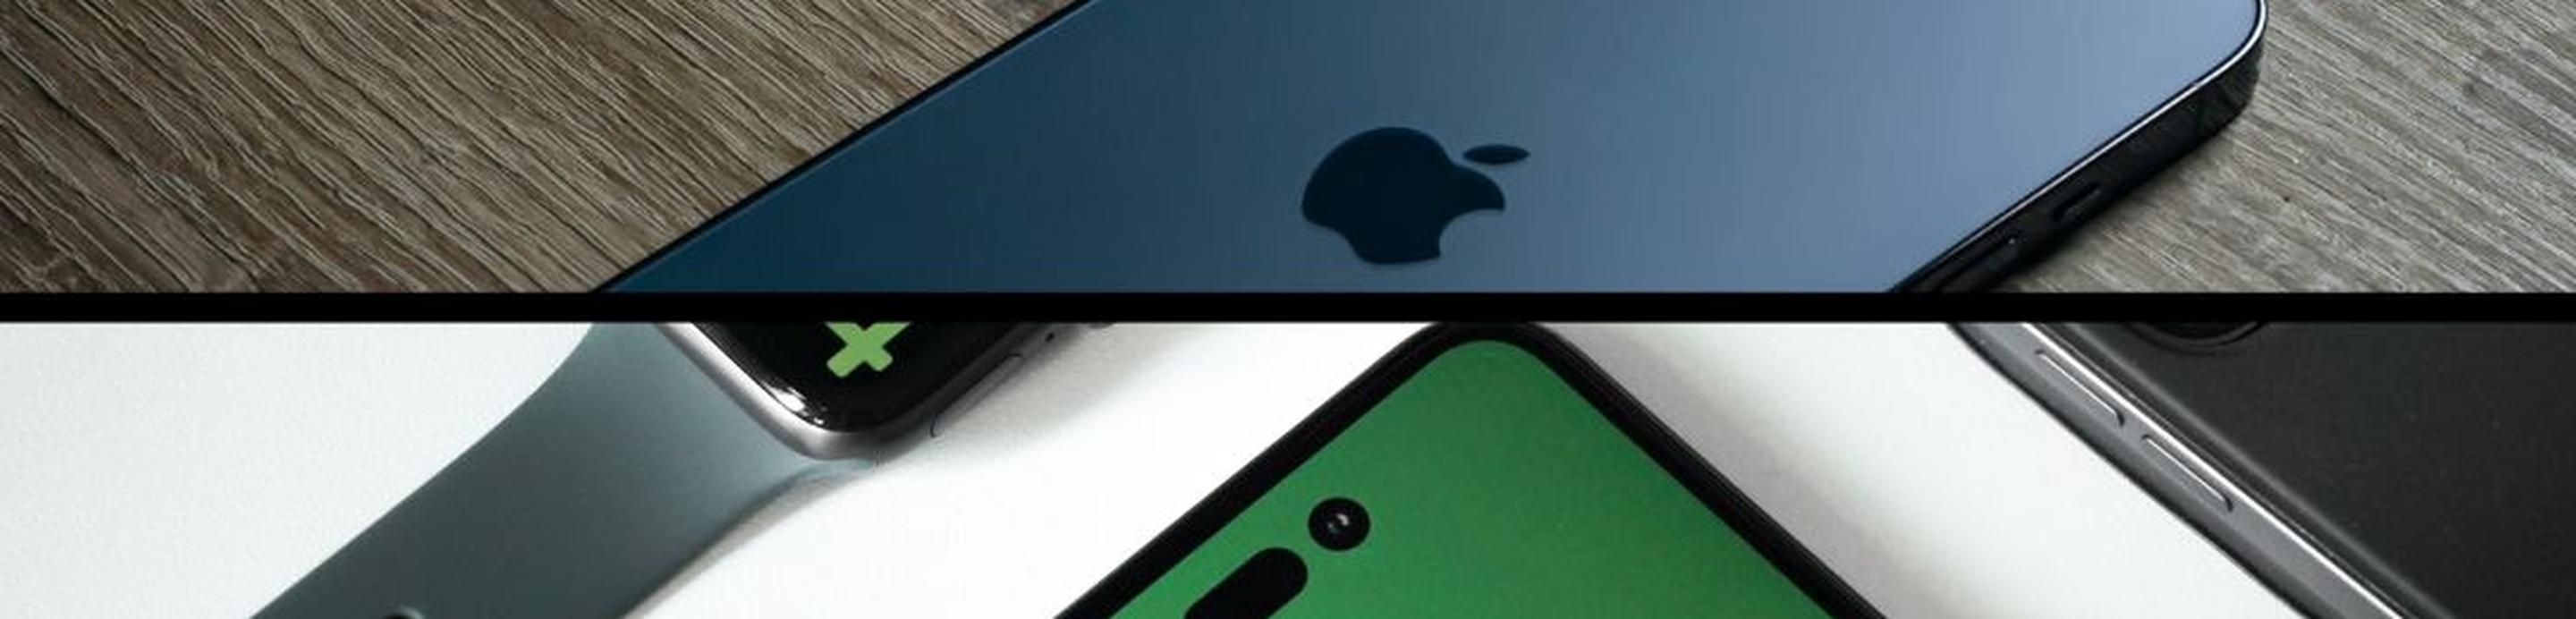 iphone-13-or-iphone-14